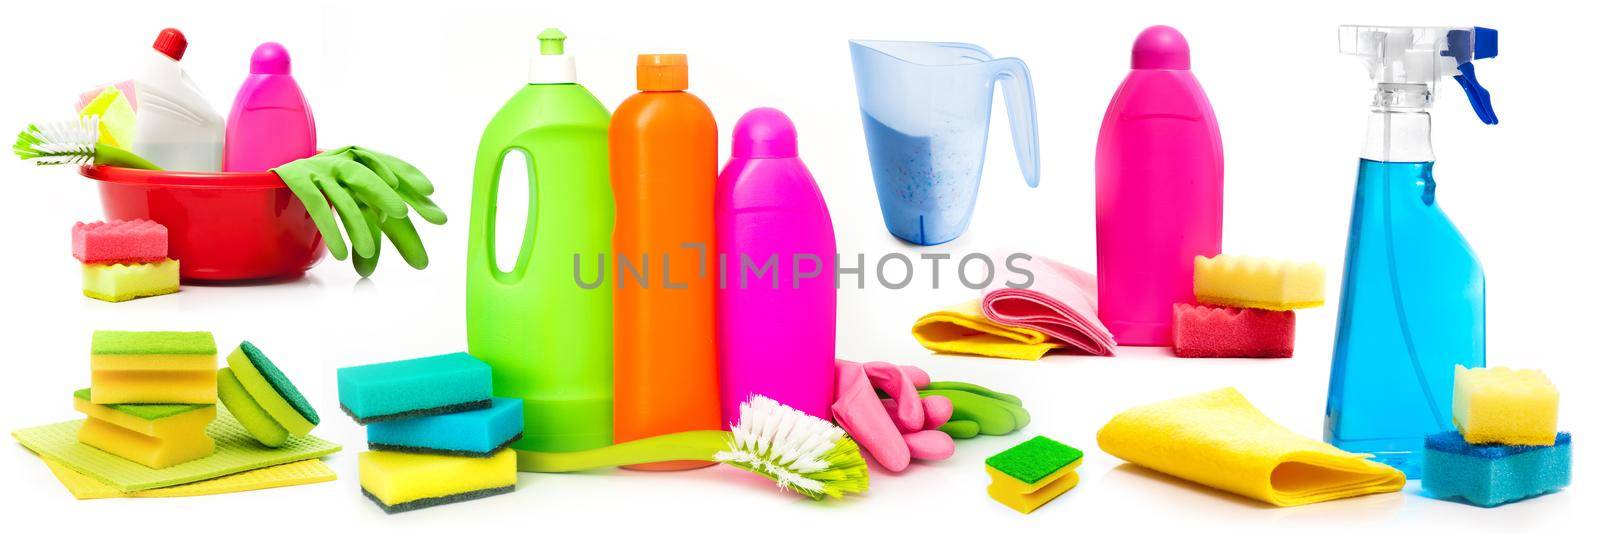 Set various detergents isolated on white background by tan4ikk1